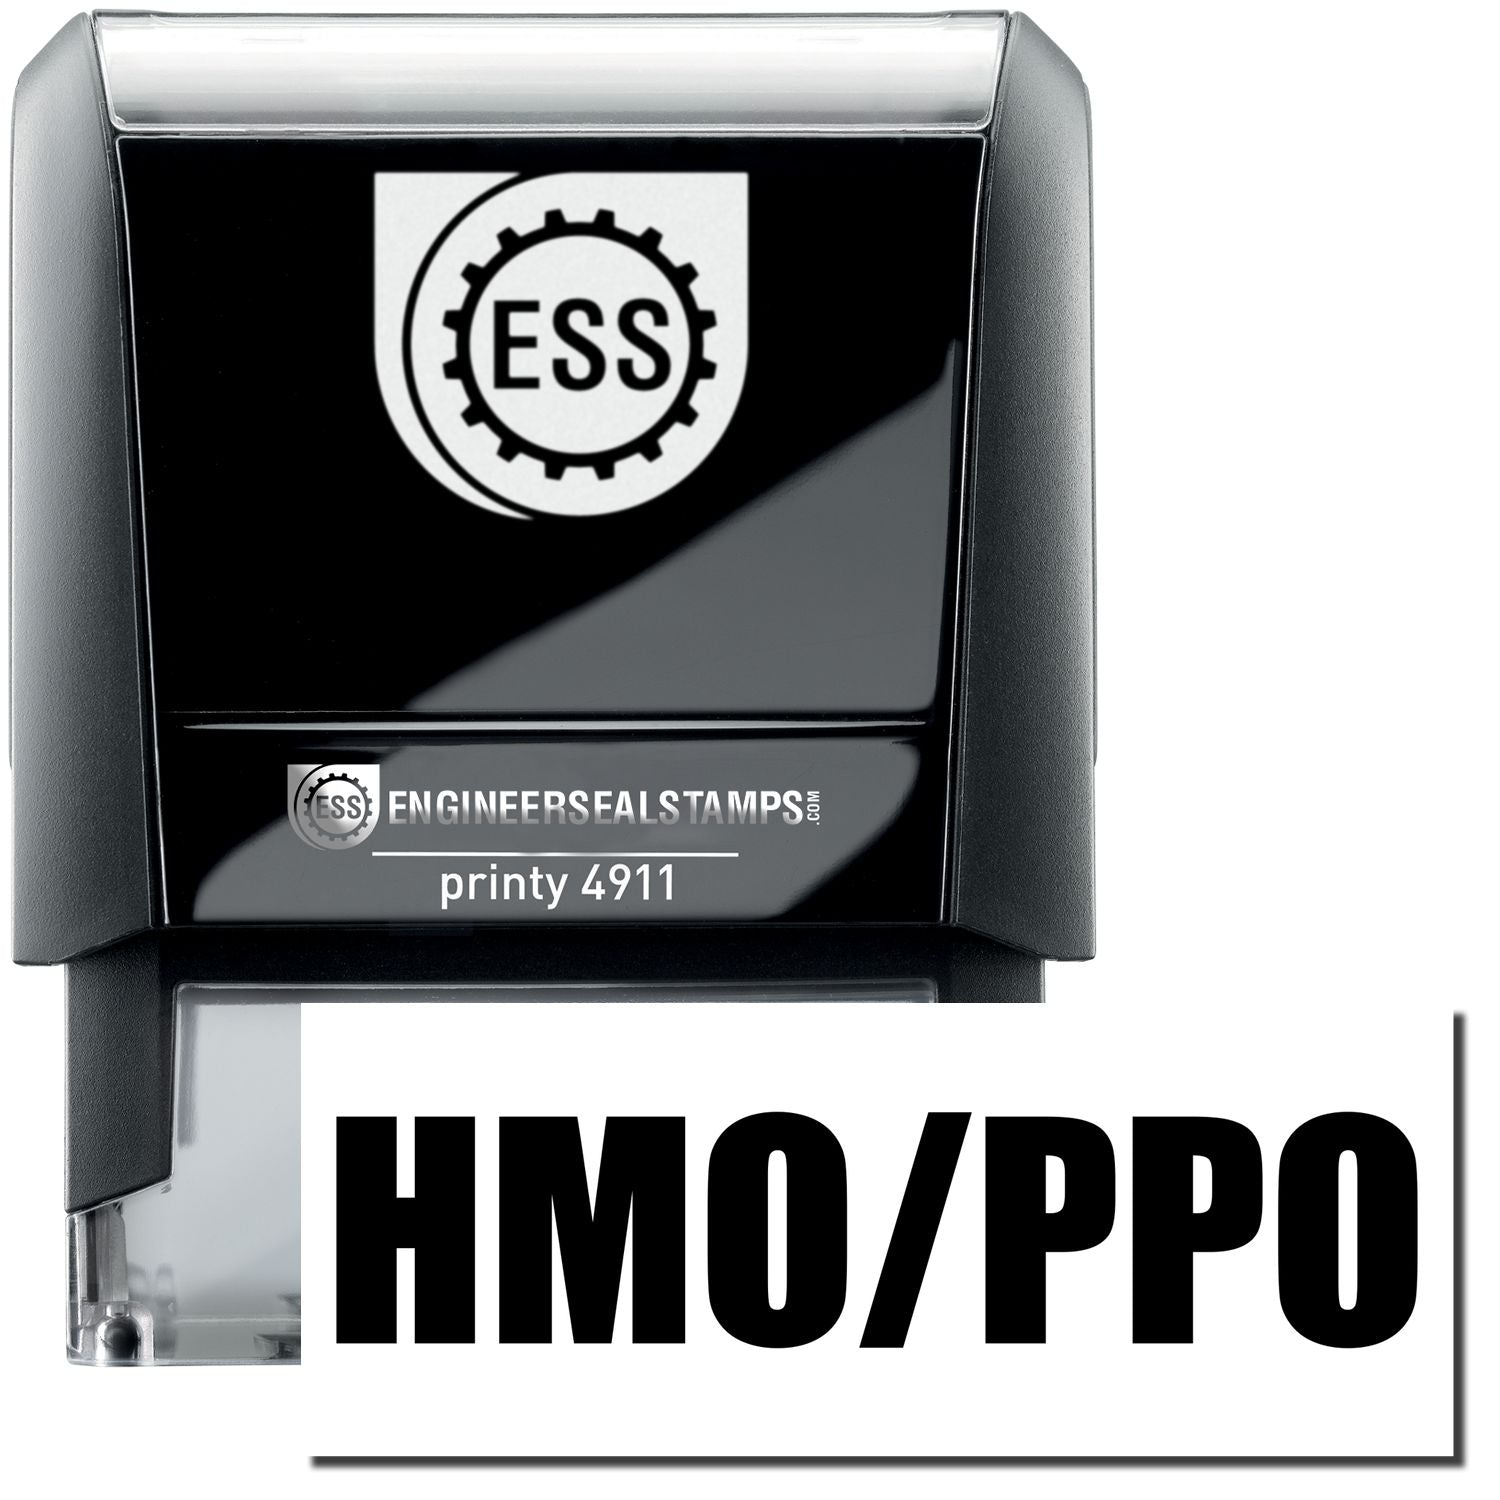 A self-inking stamp with a stamped image showing how the text "HMO/PPO" is displayed after stamping.